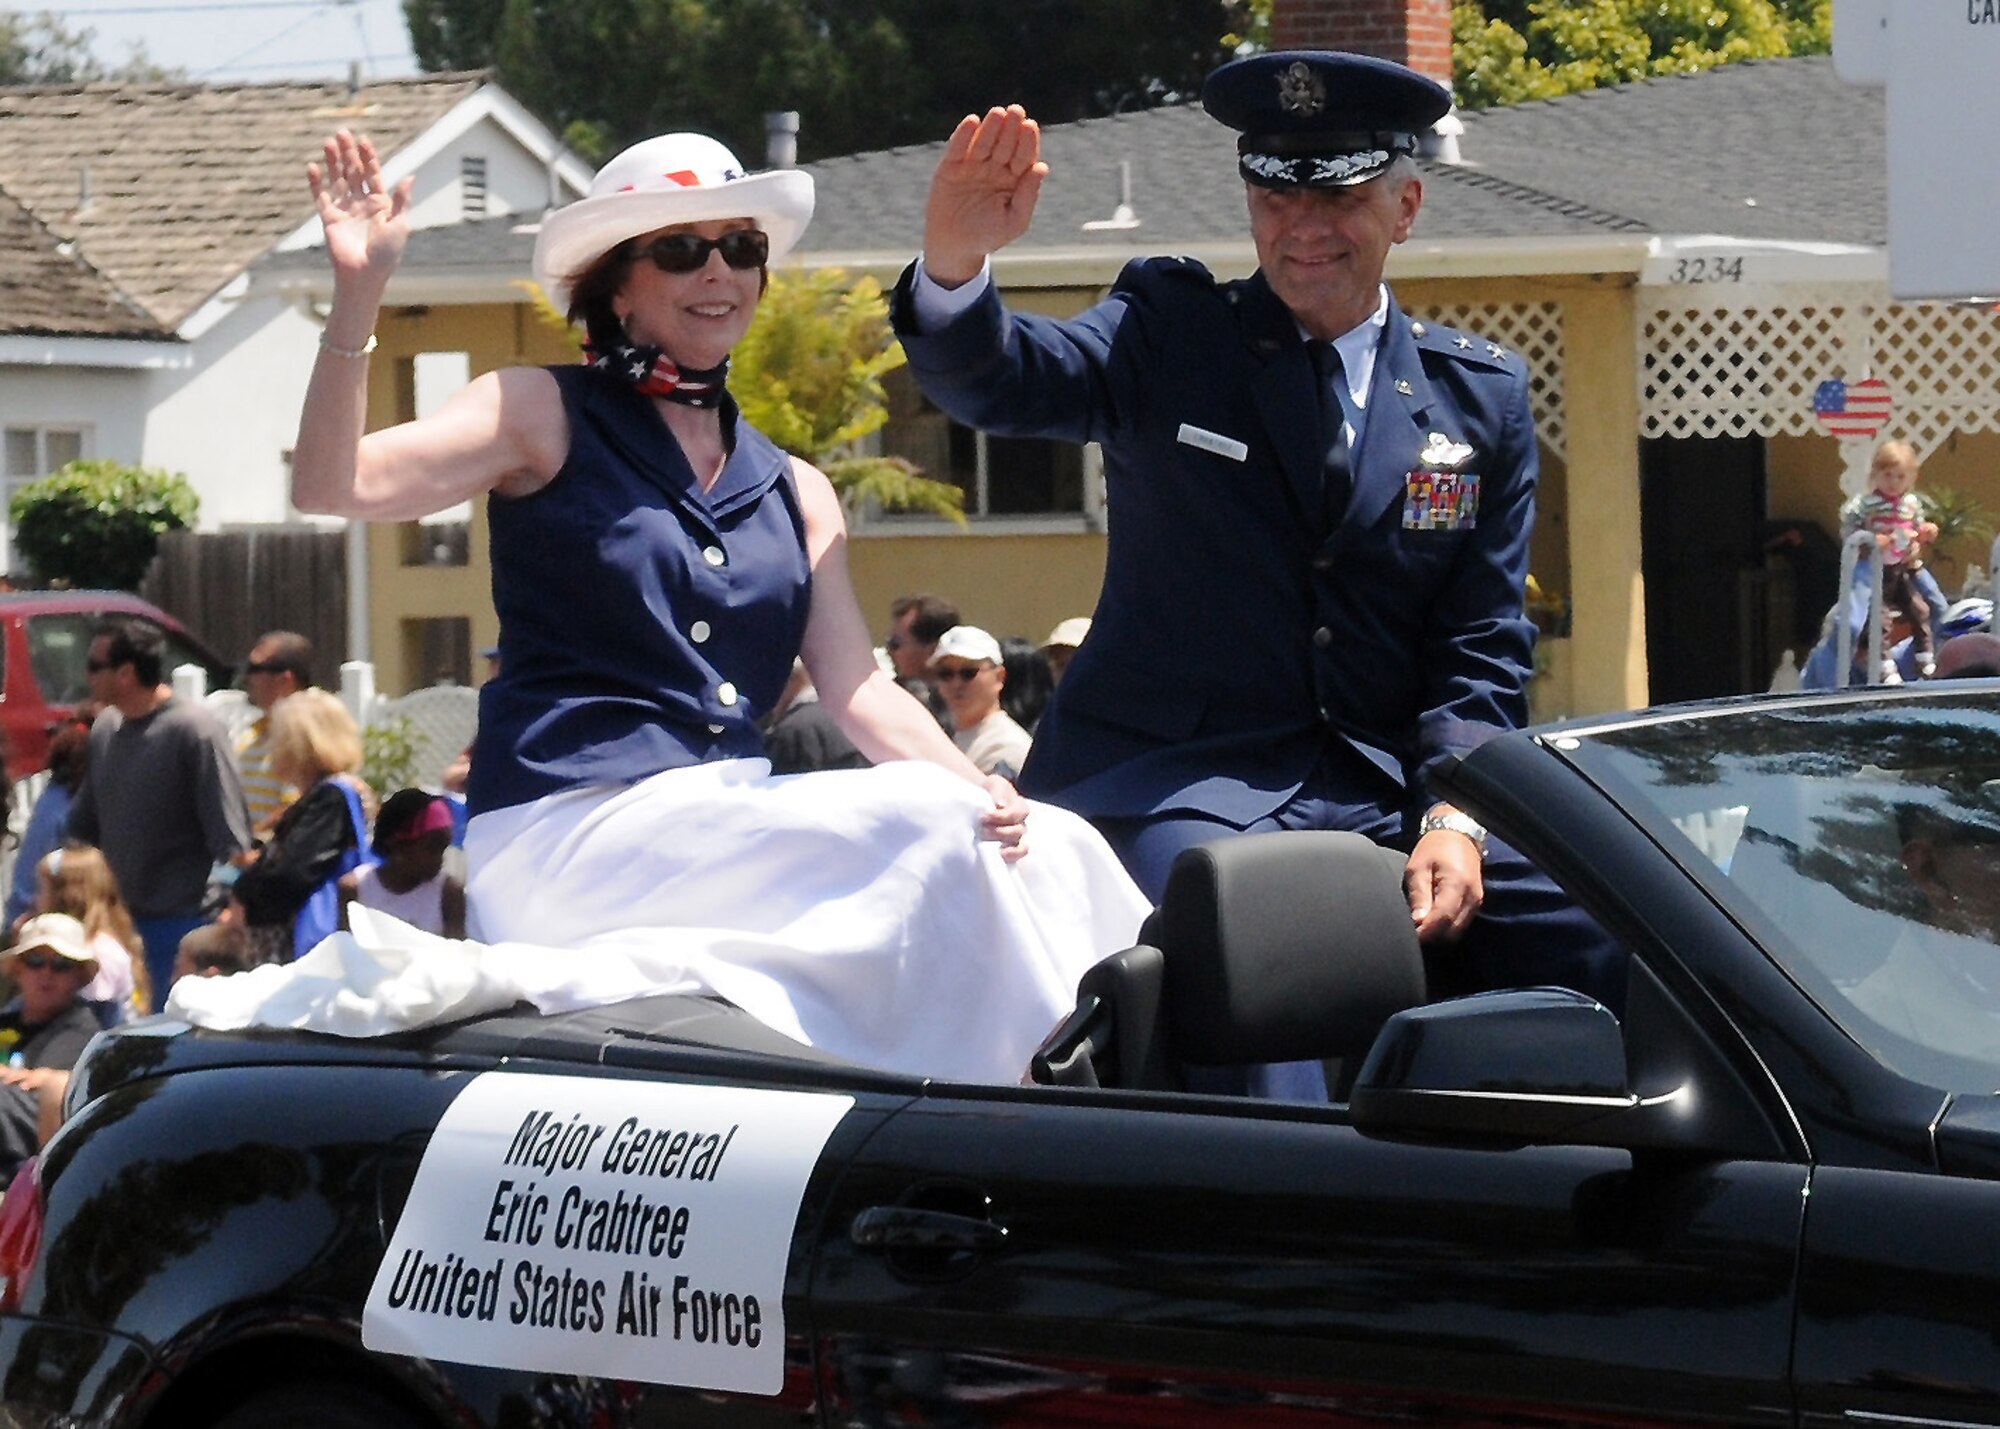 Maj. Gen. Eric Crabtree, Commander, Headquarters Fourth Air Force, March Air Reserve Base, Calif., and his wife, Beth, ride in the 2010 Armed Forces Day parade, Torrance, Calif., May 15.  Torrance is one of the few cities in the nation designated by the U.S. Department of Defense to host an Armed Forces Day celebration.  The parade, the nation's longest running, military parade sponsored by any American city,  is the highlight.  (U.S. Air Force photo/Jim Gordon/Released)